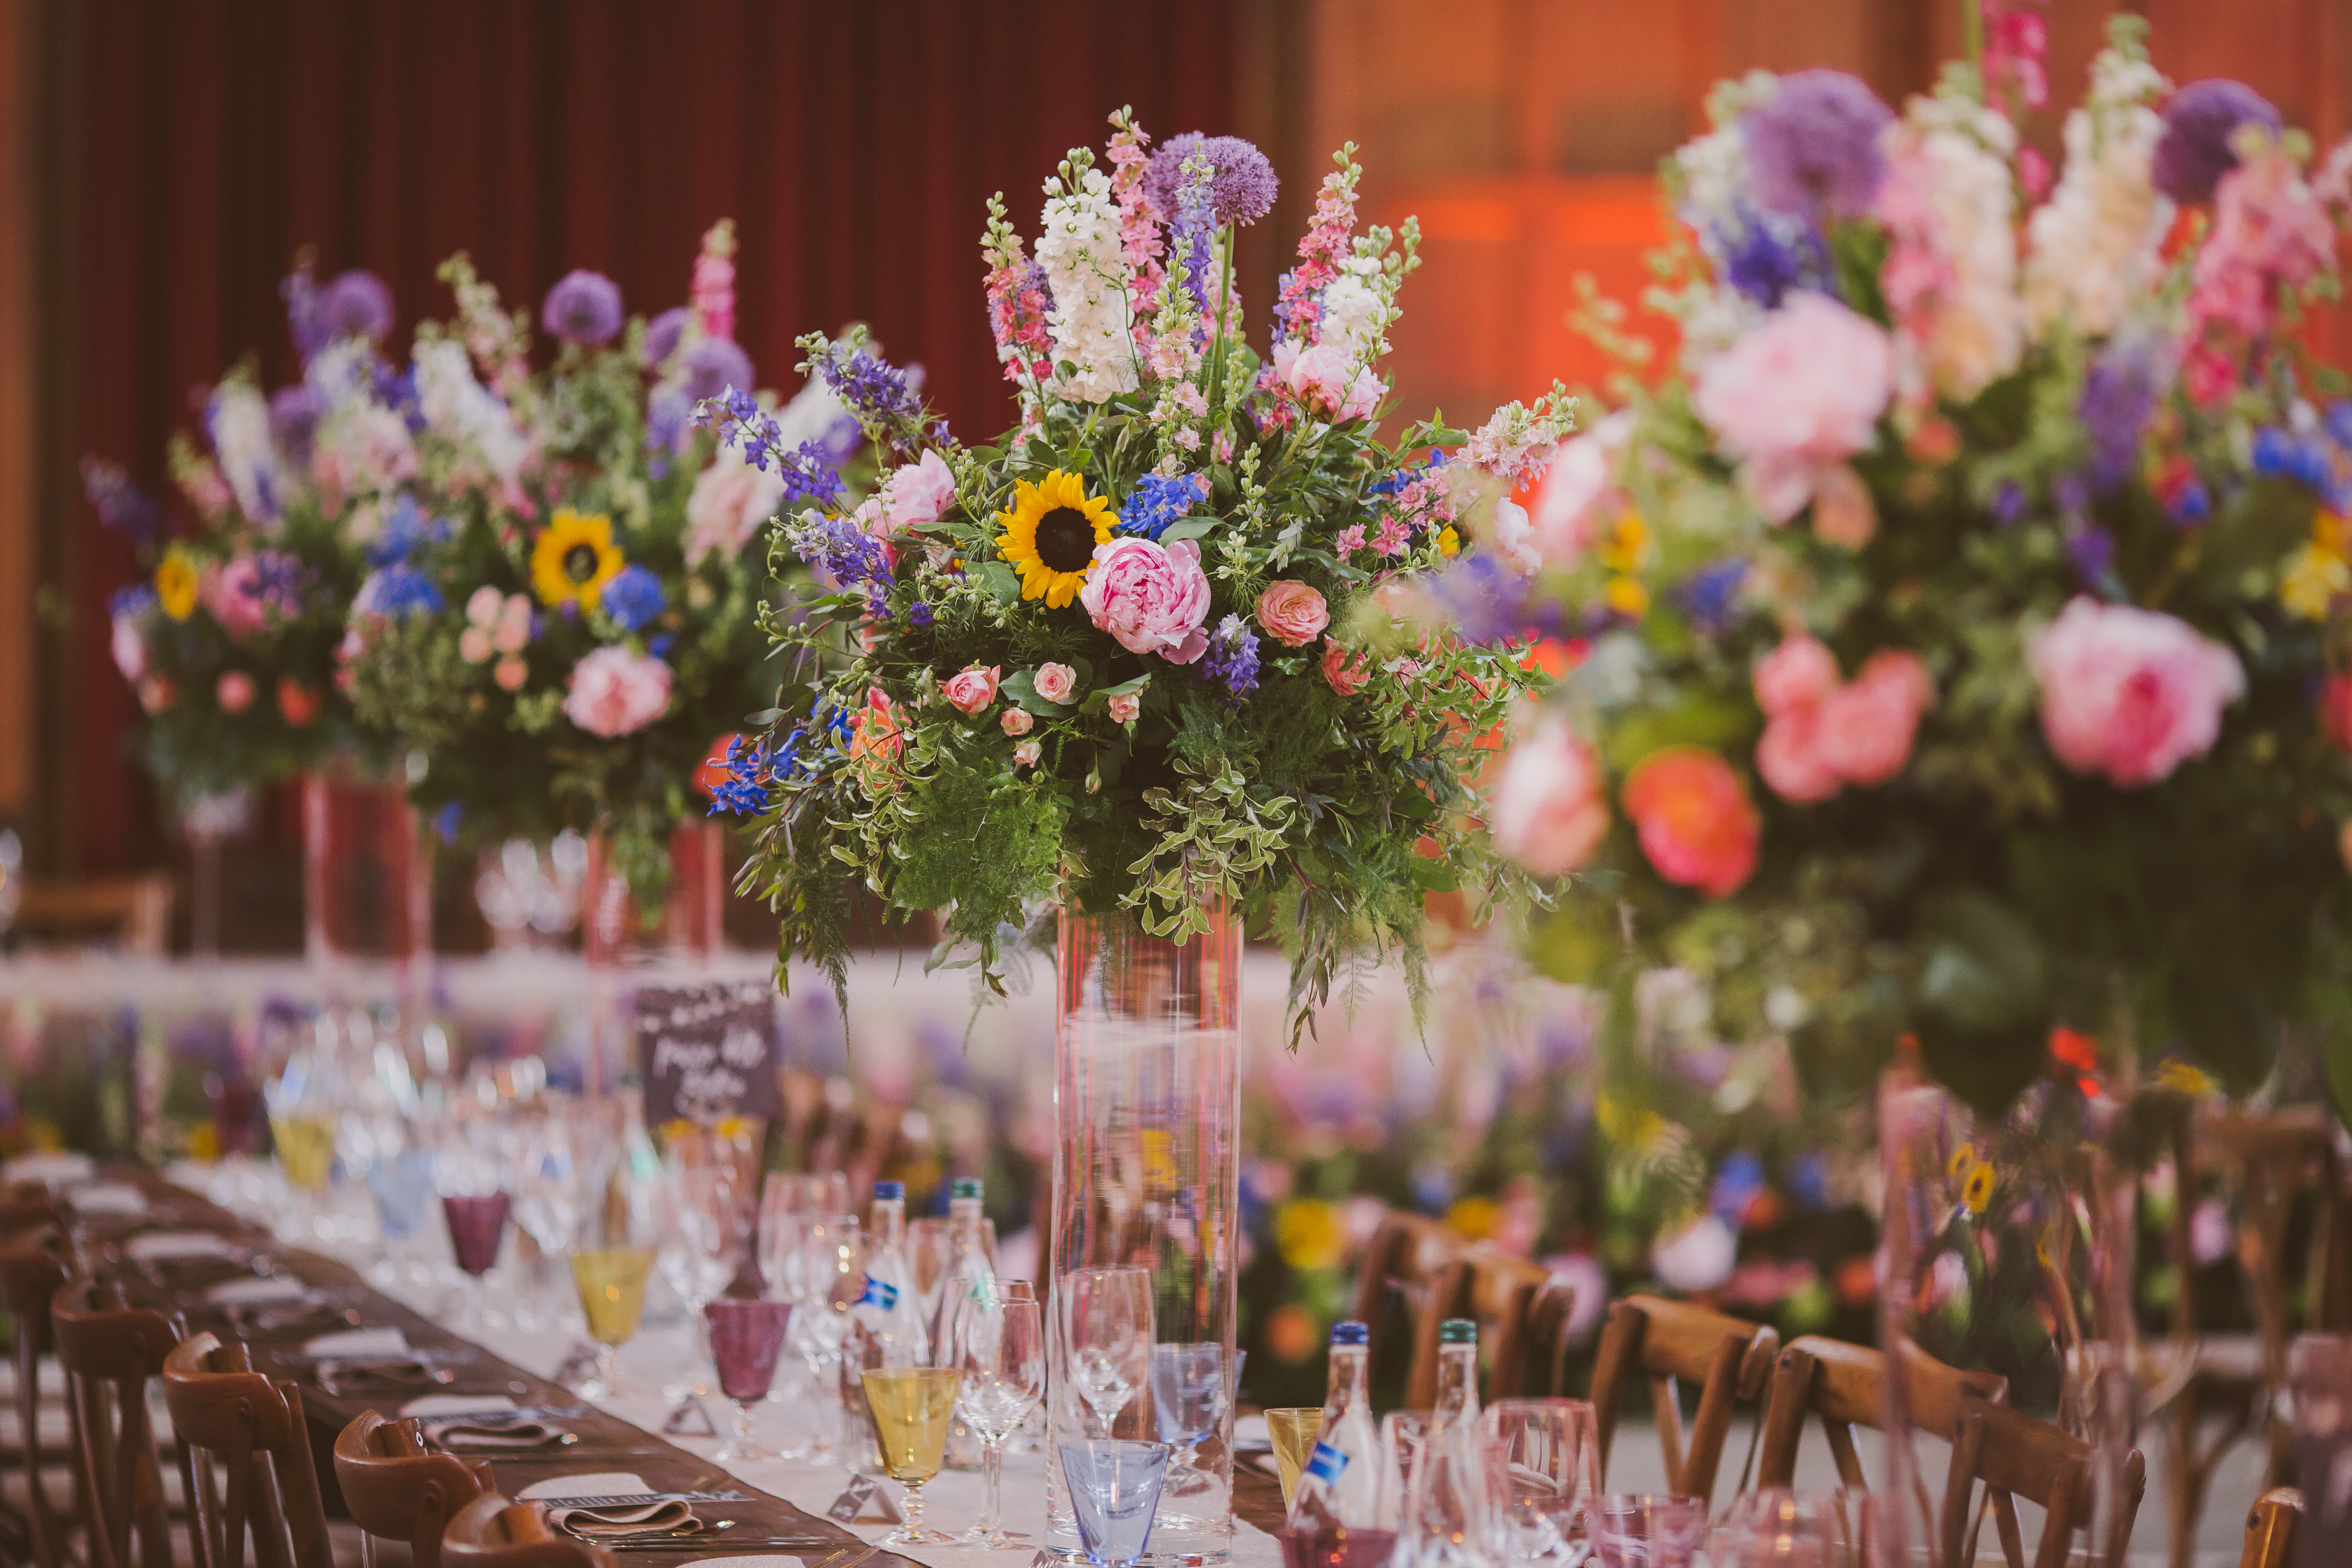 Summer flowers in tall vases for a wedding breakfast